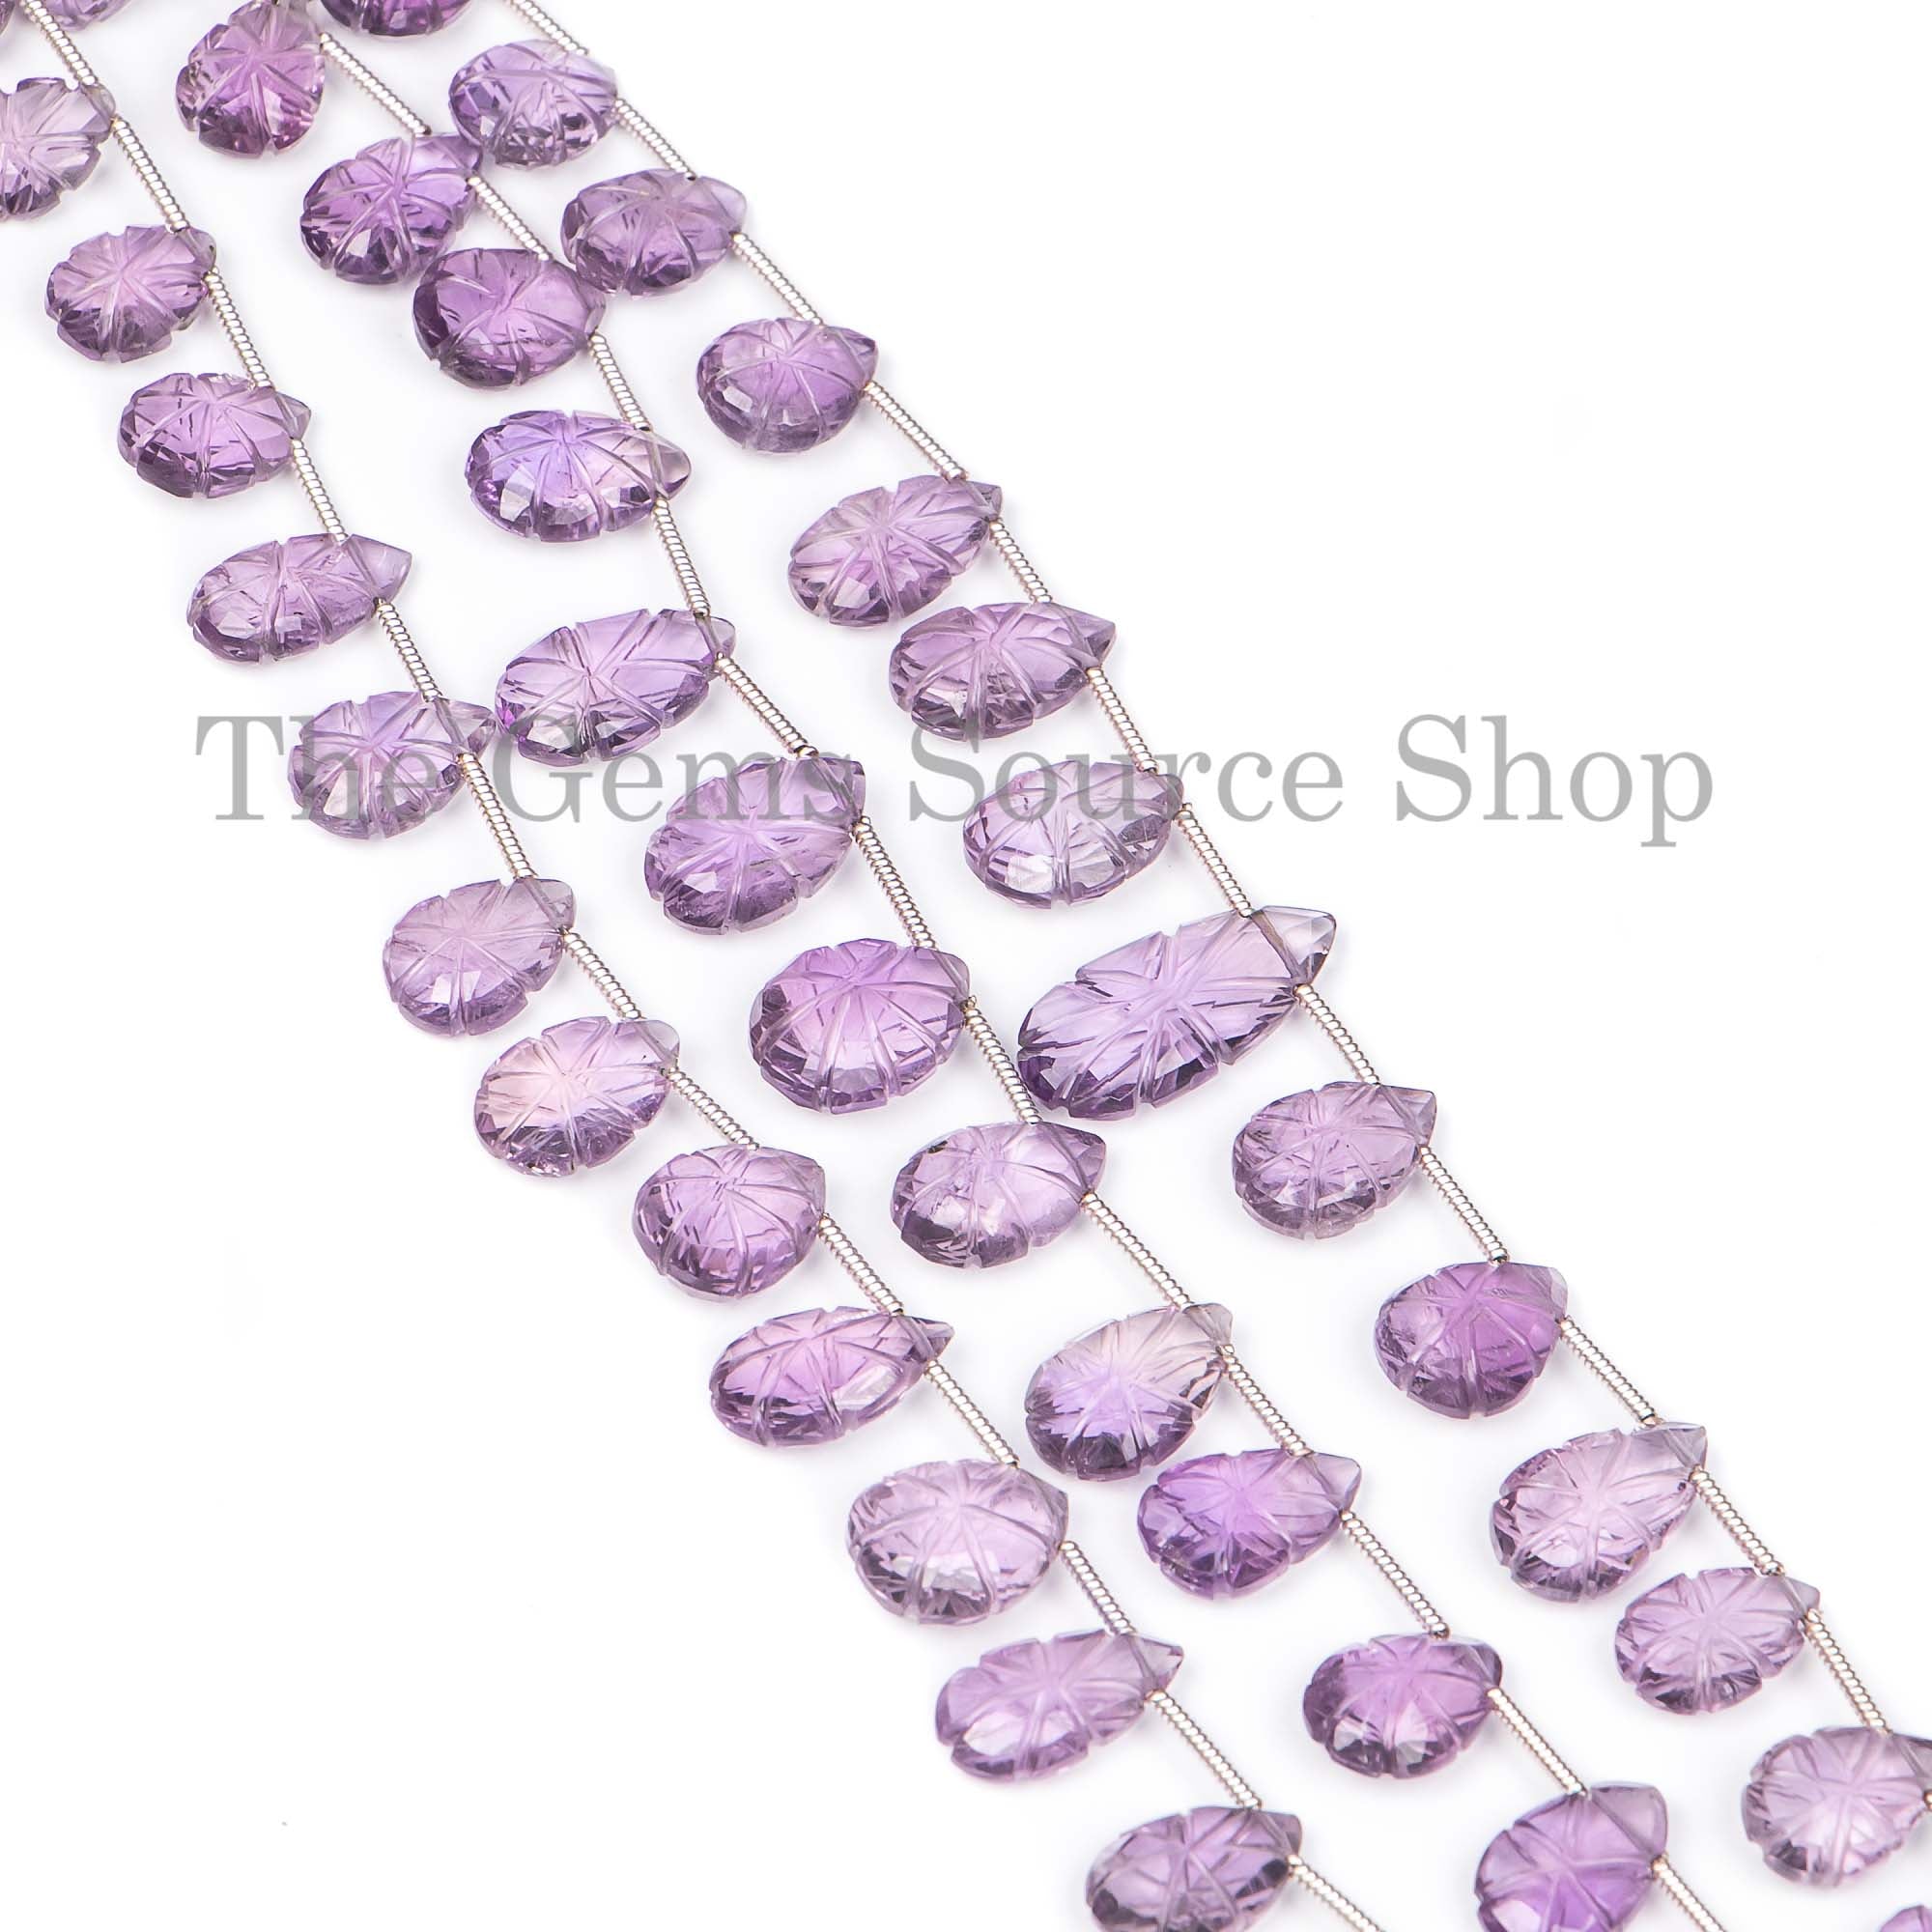 Extremely Rare Amethyst Pear Flower Carving Beads, Amethyst Flower Beads